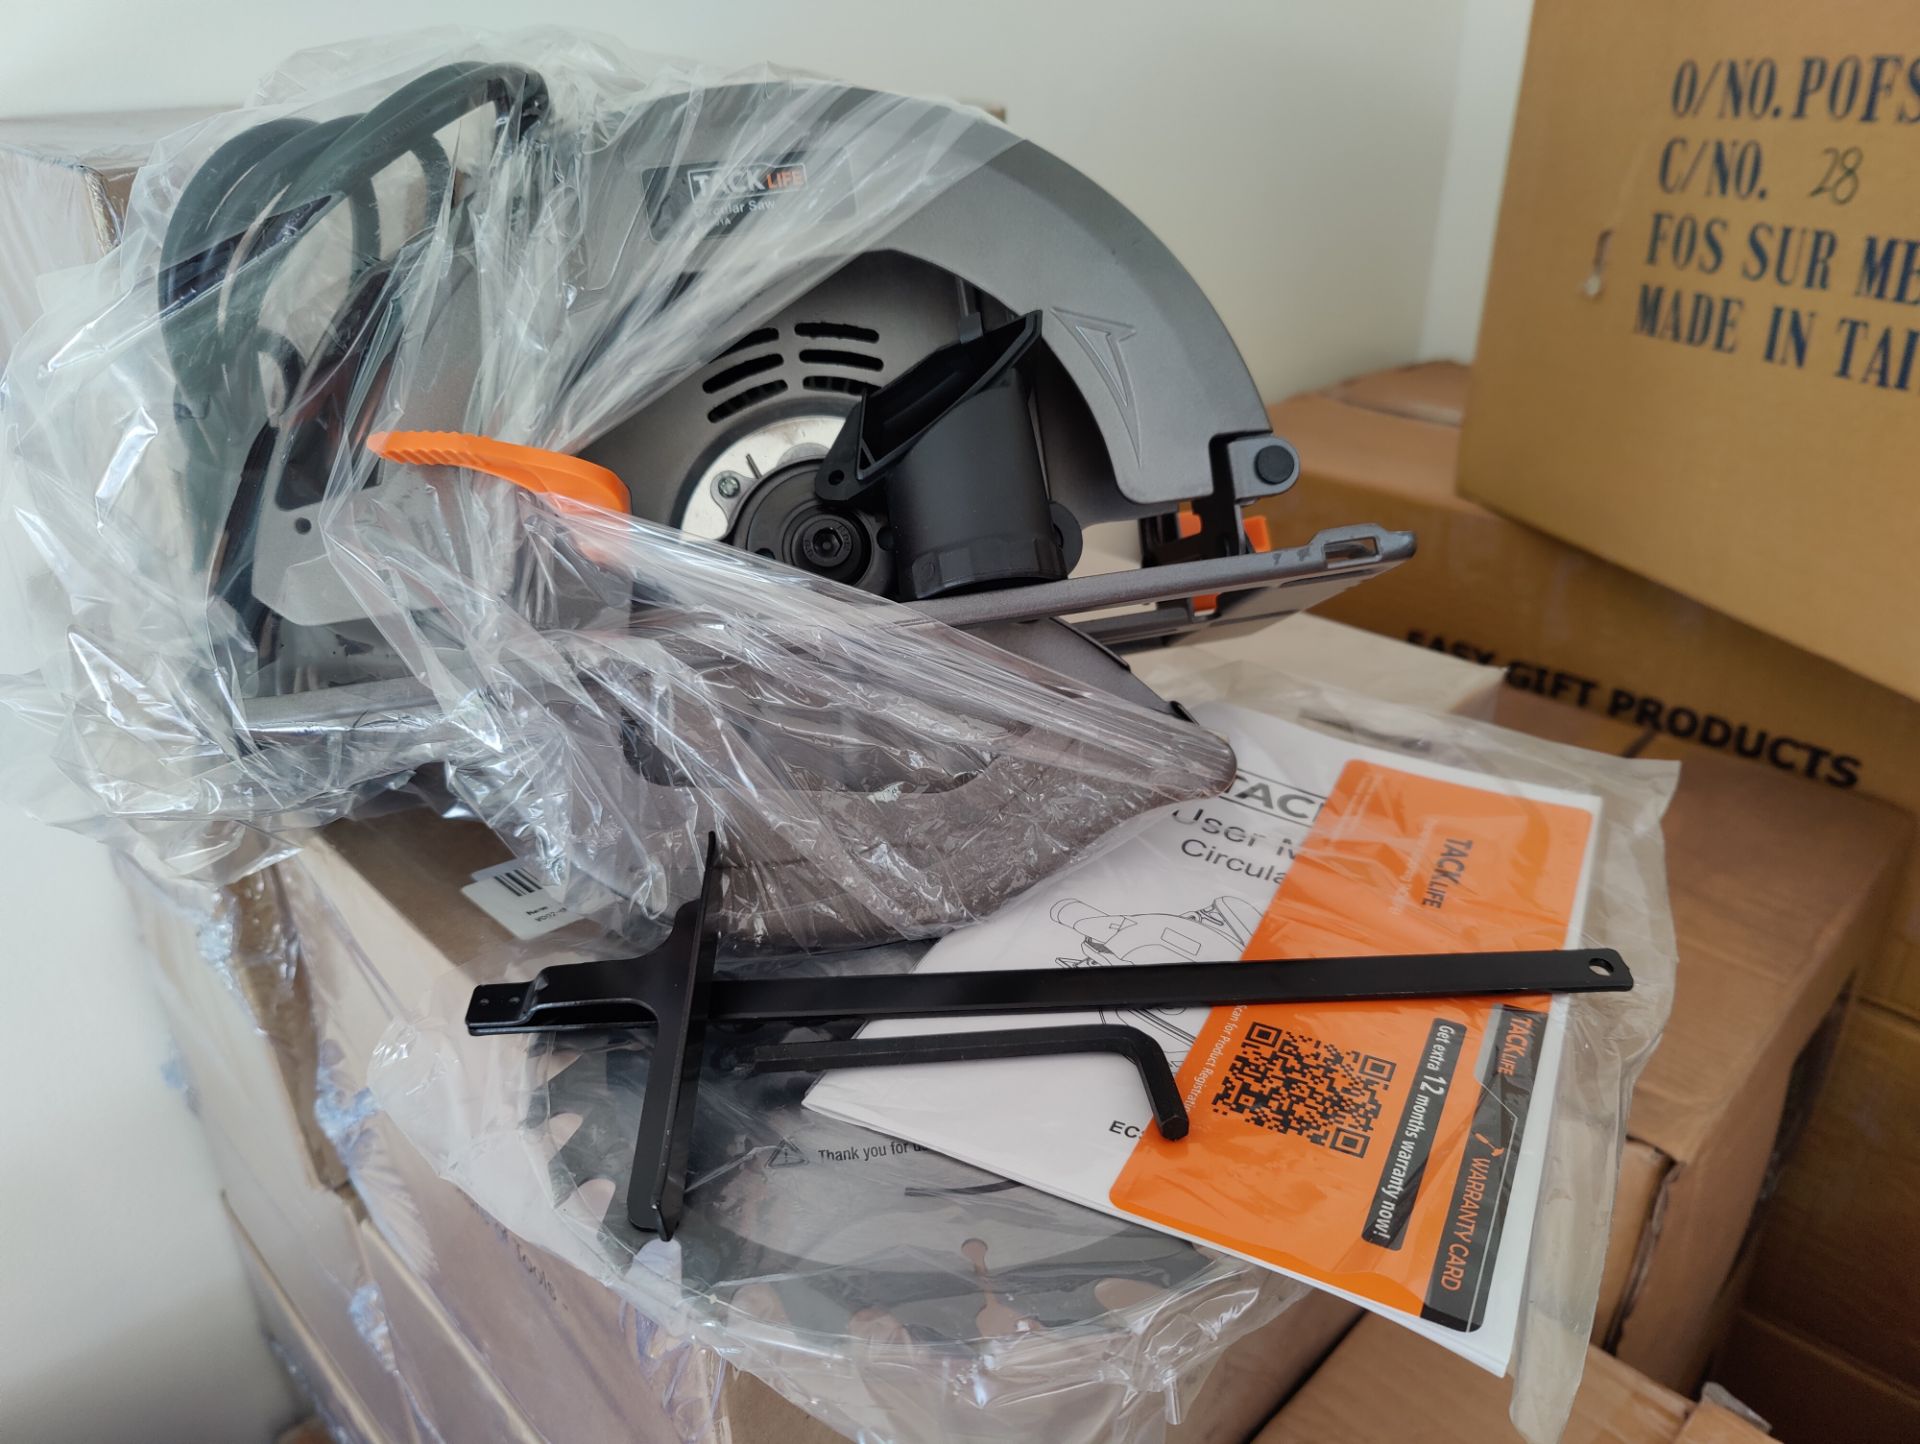 2 x Trade Lot New Boxed Tacklife Electric Circular Saw,1500W, 5000 RPM With Bevel Cuts 2-3/5' - Image 4 of 4